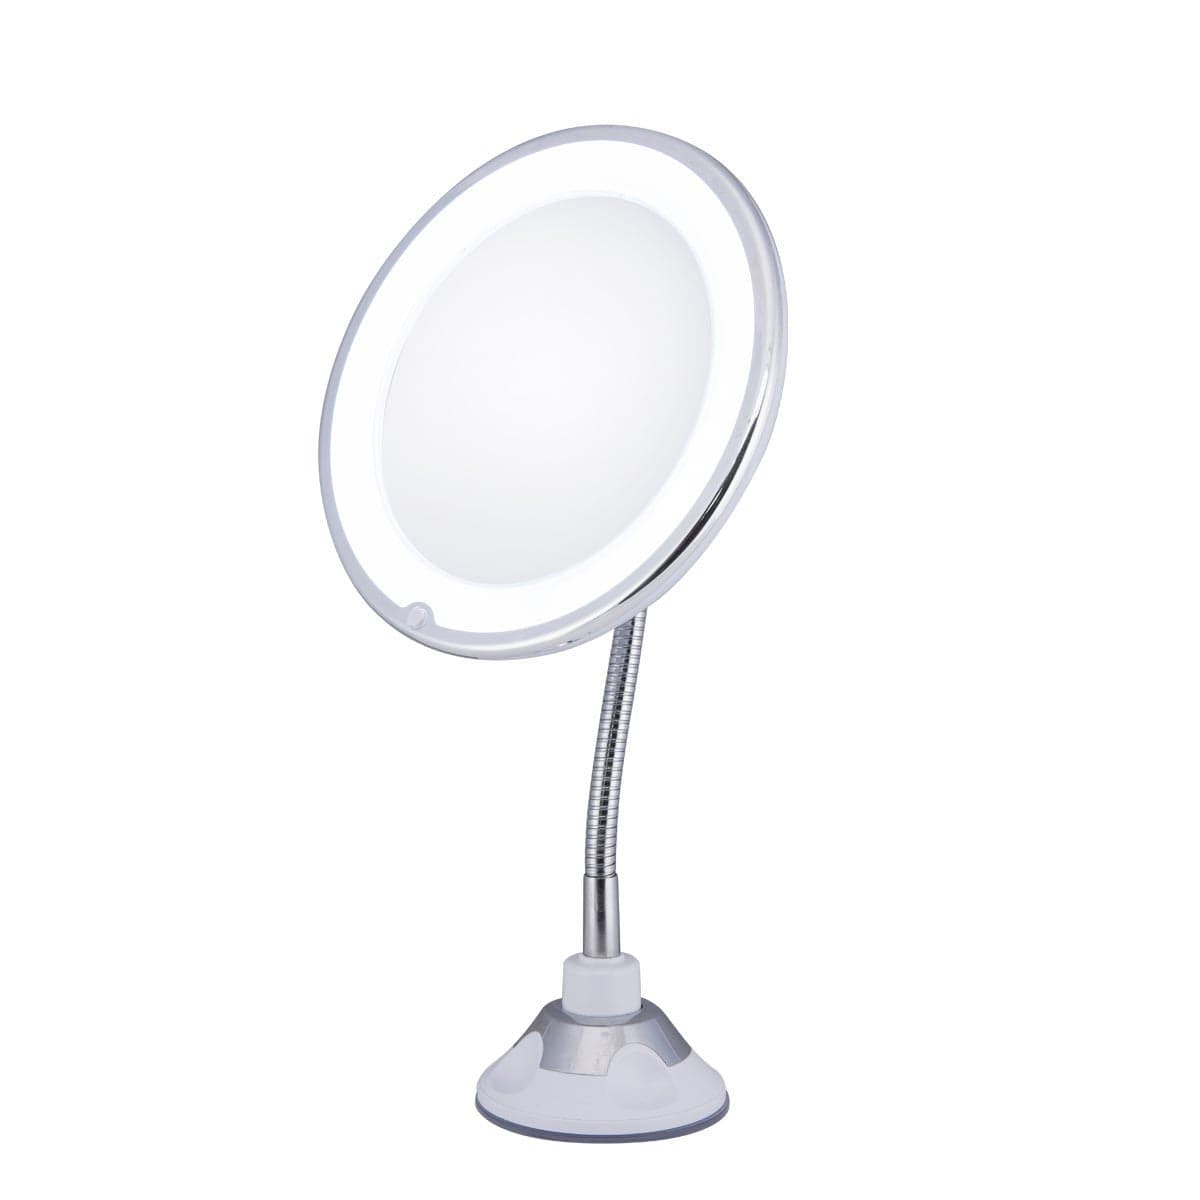 10x Magnifying Makeup Mirror with LED light